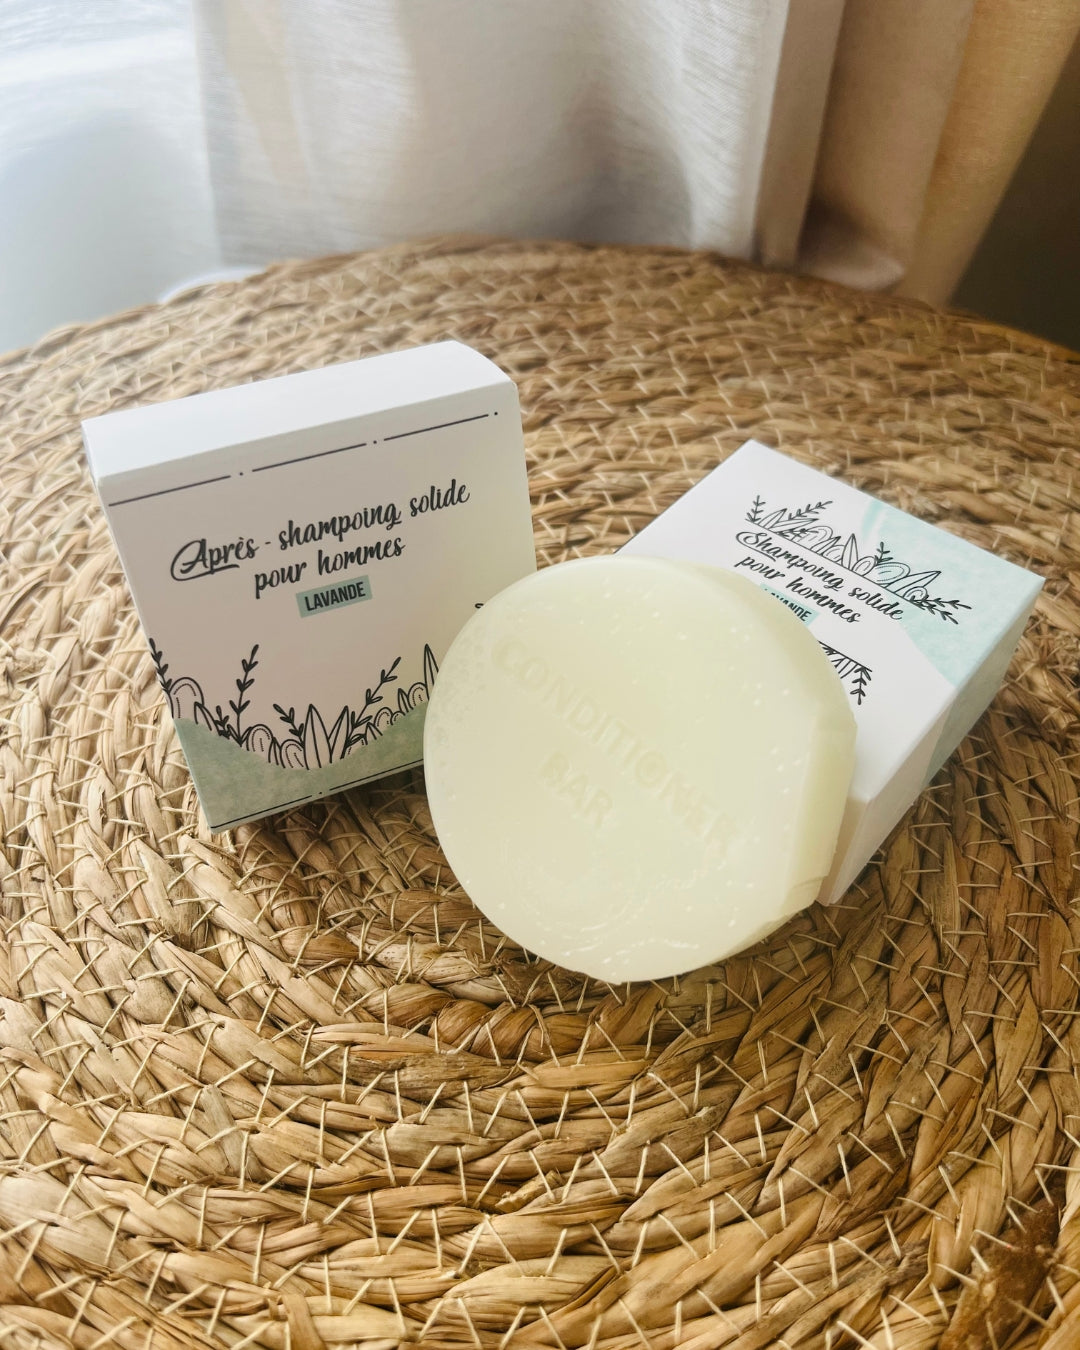 Duo Shampoing / Après-shampoing solides